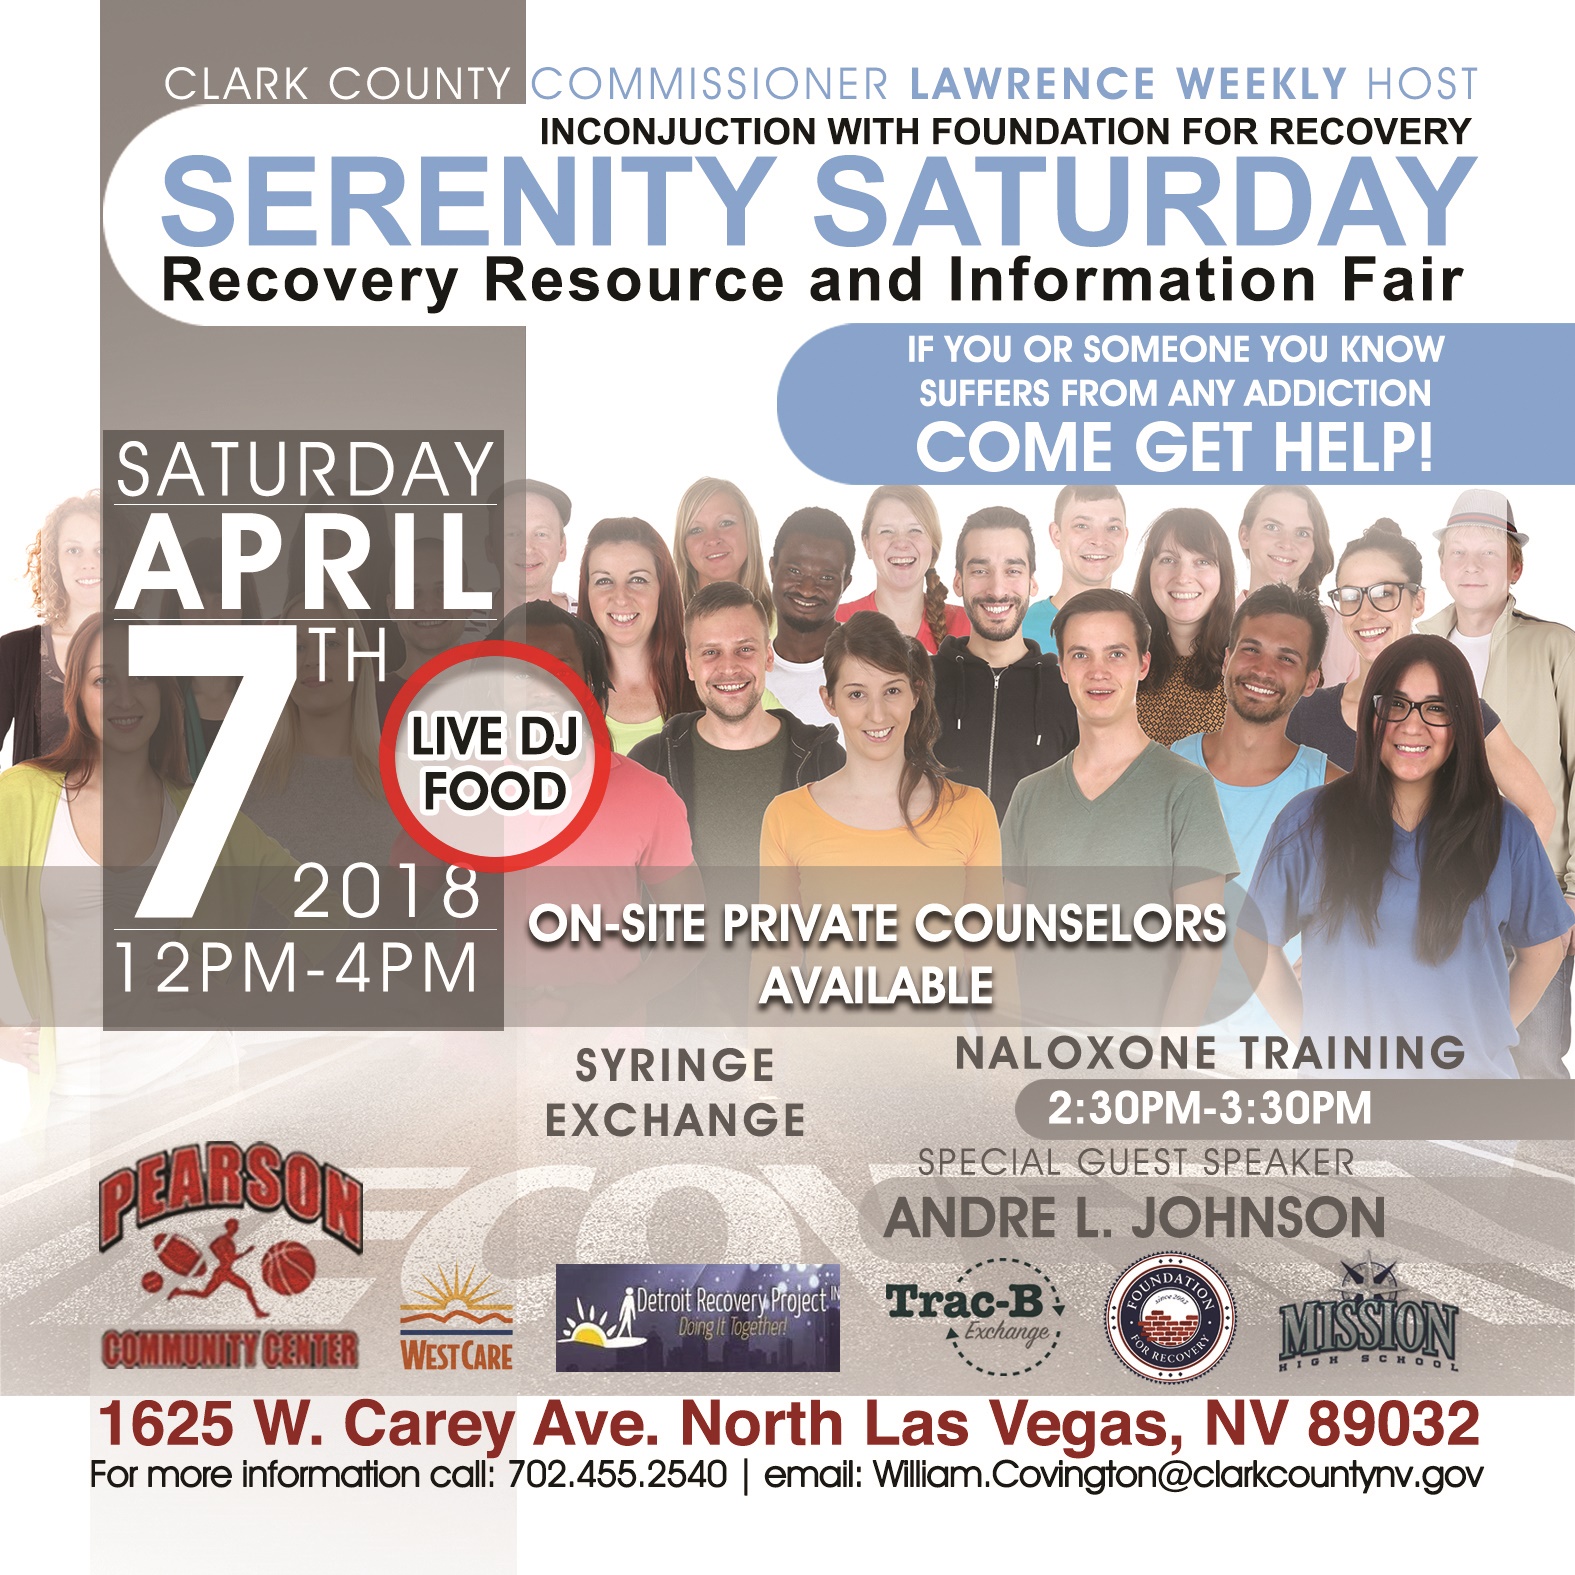 Image of the flier for the Serenity Saturday Recovery Fair